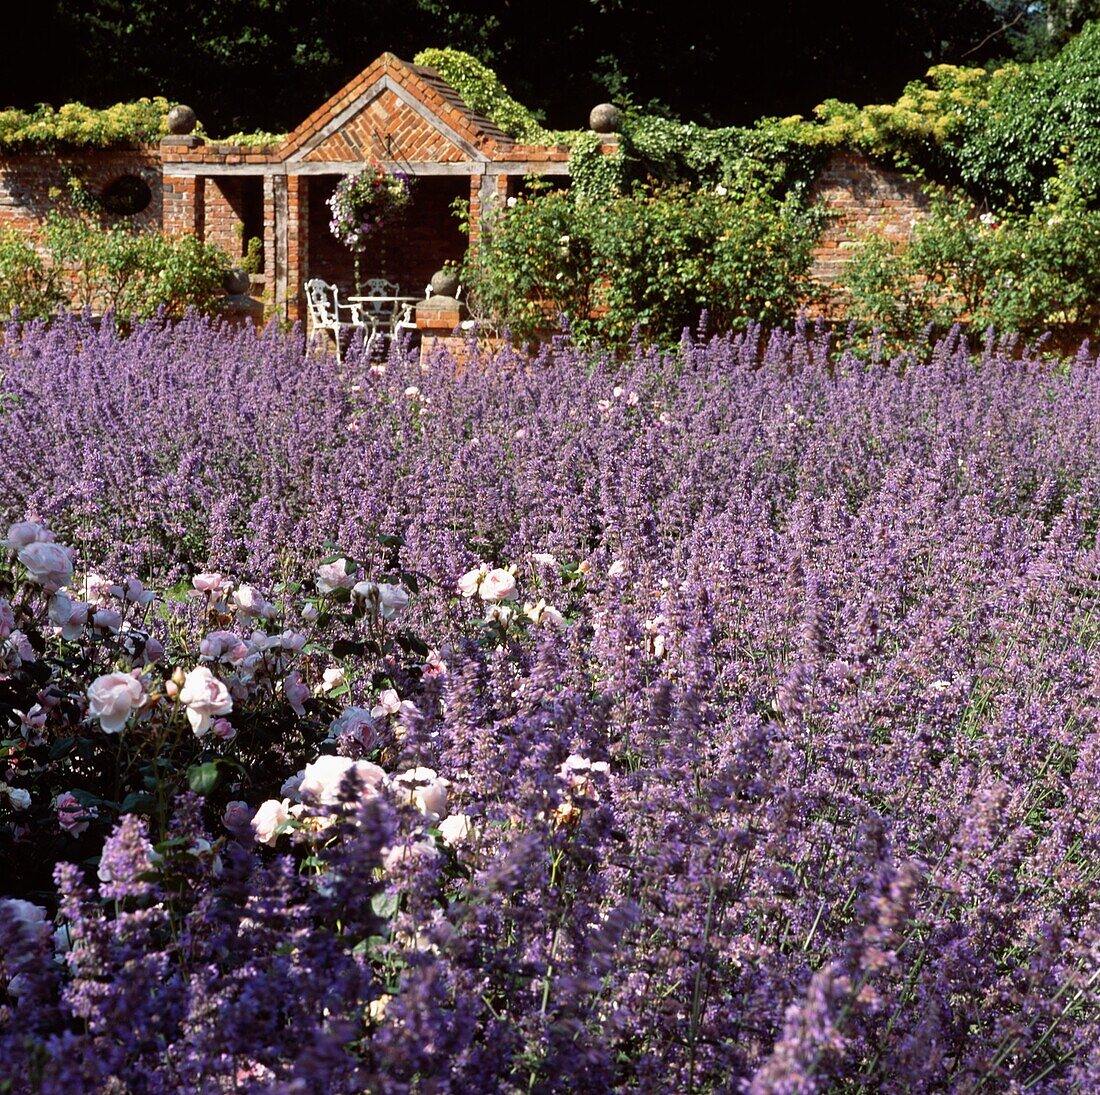 Chairs in brick summer house and field of lavender